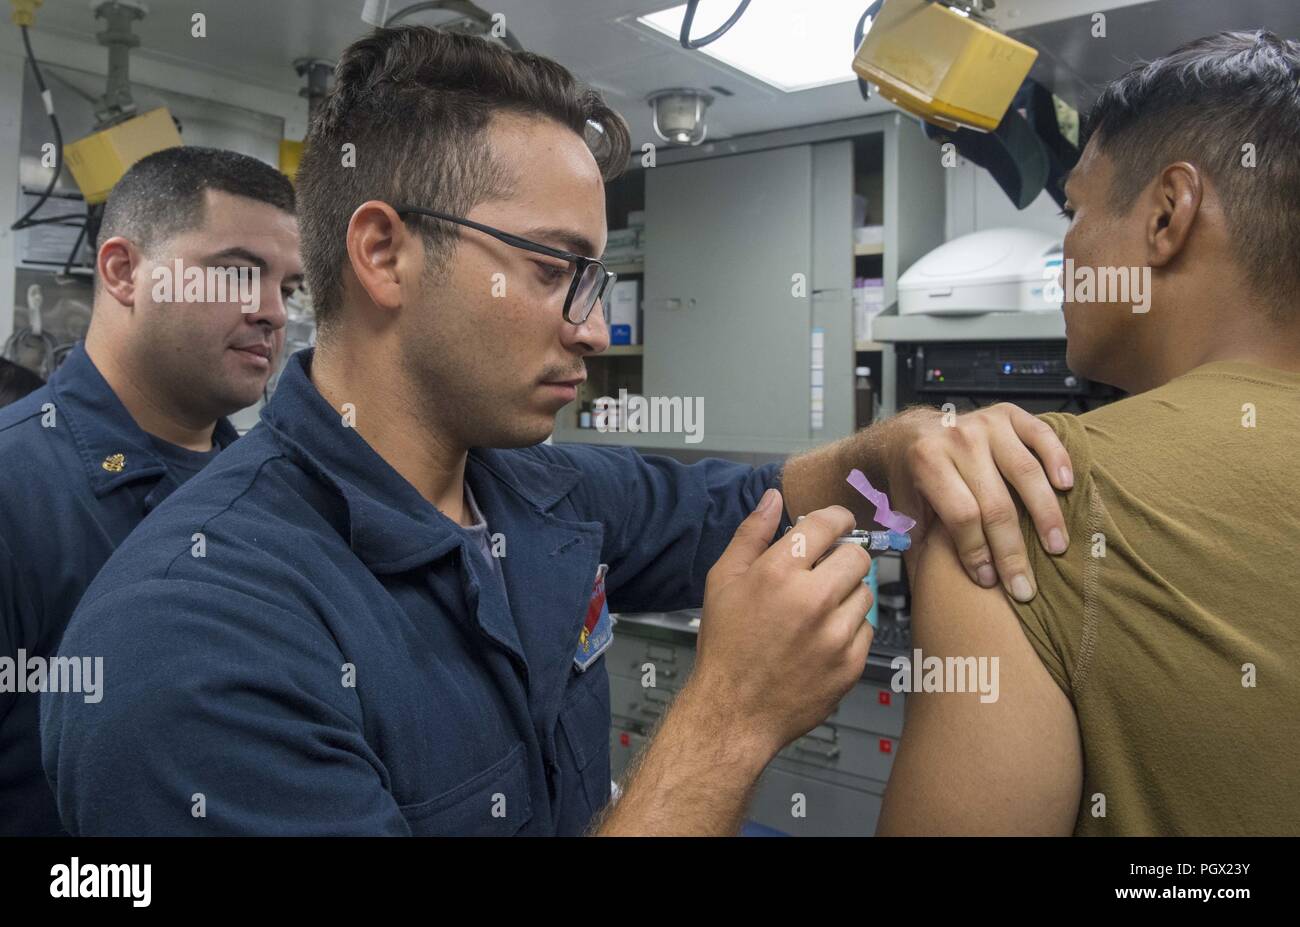 Seaman Santiago Arevalo-Mendoza administering a Japanese encephalitis vaccine to a Sailor aboard the Arleigh Burke-class guided-missile destroyer USS Benfold (DDG 65), East China Sea, August 22, 2018. Image courtesy Petty Officer 2nd Class Elesia Patten / U.S. Navy. () Stock Photo